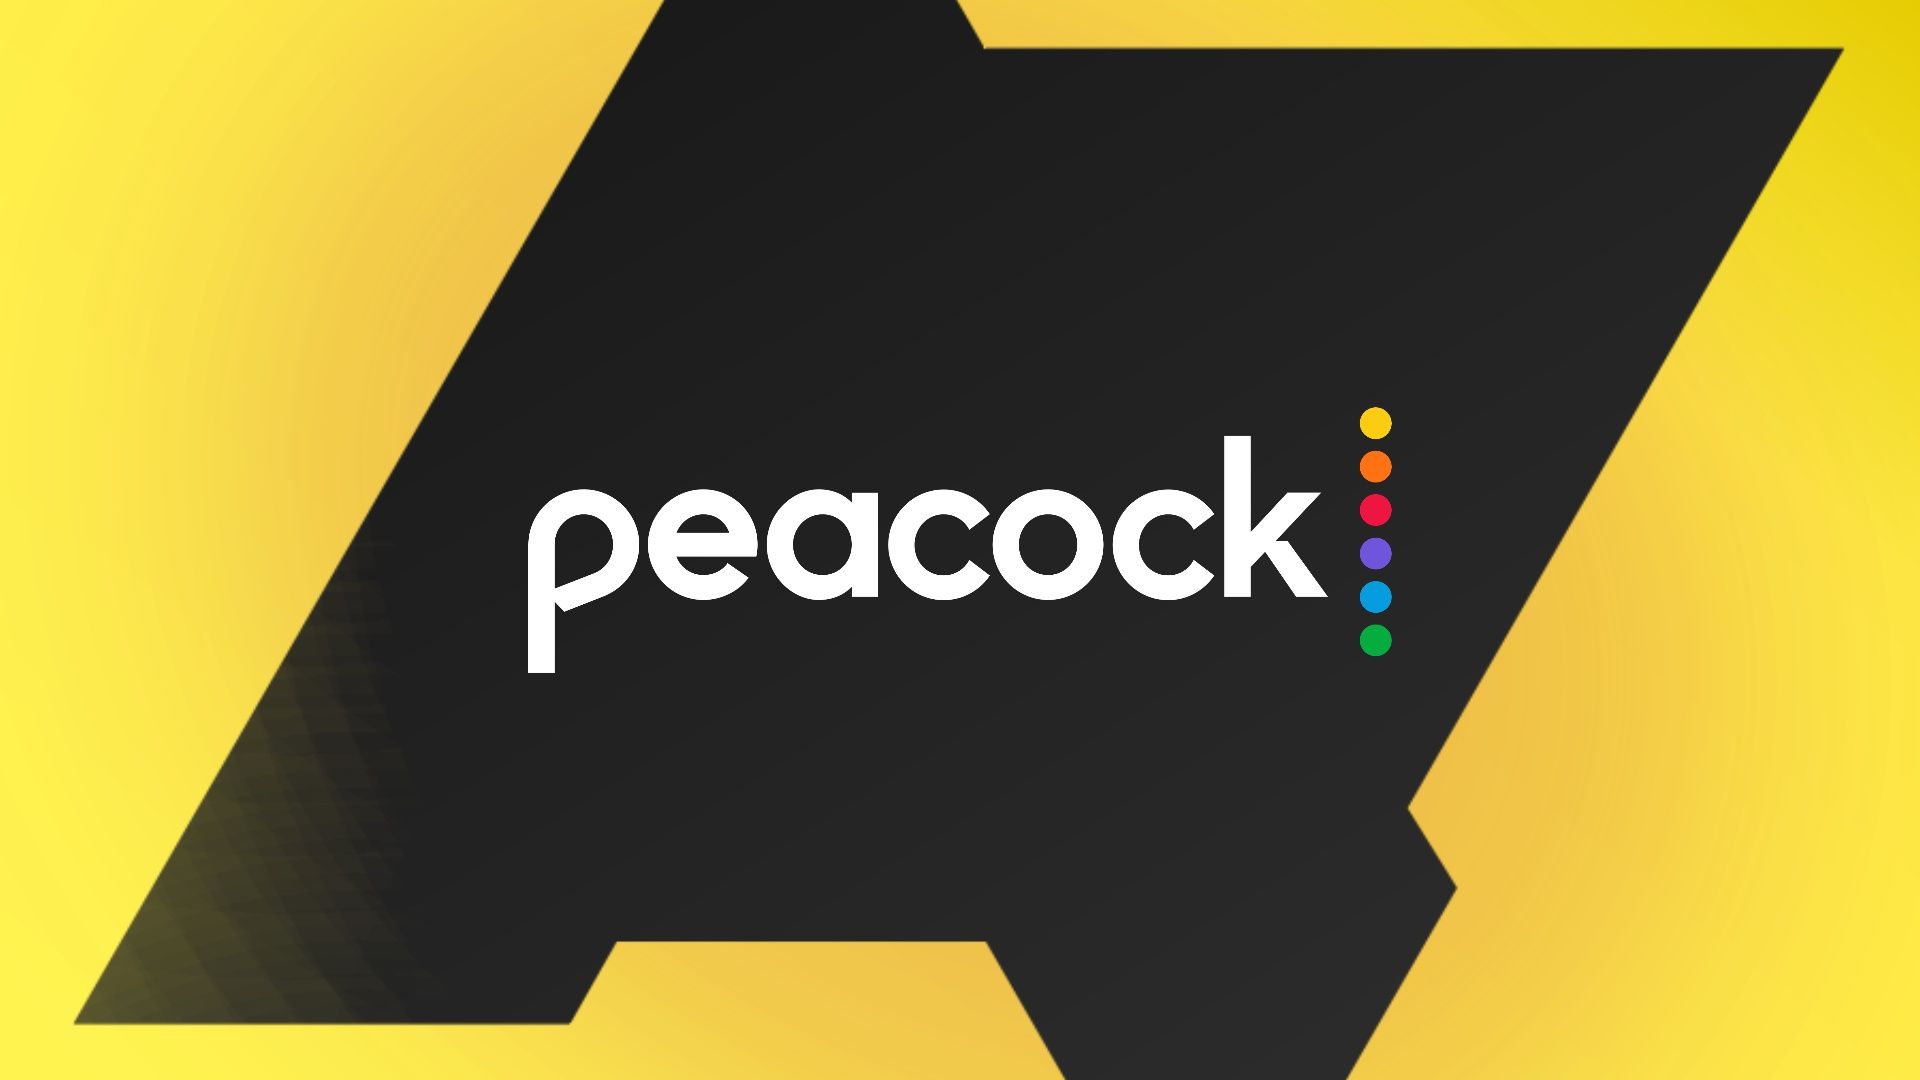 The Peacock logo over the Android Police logo